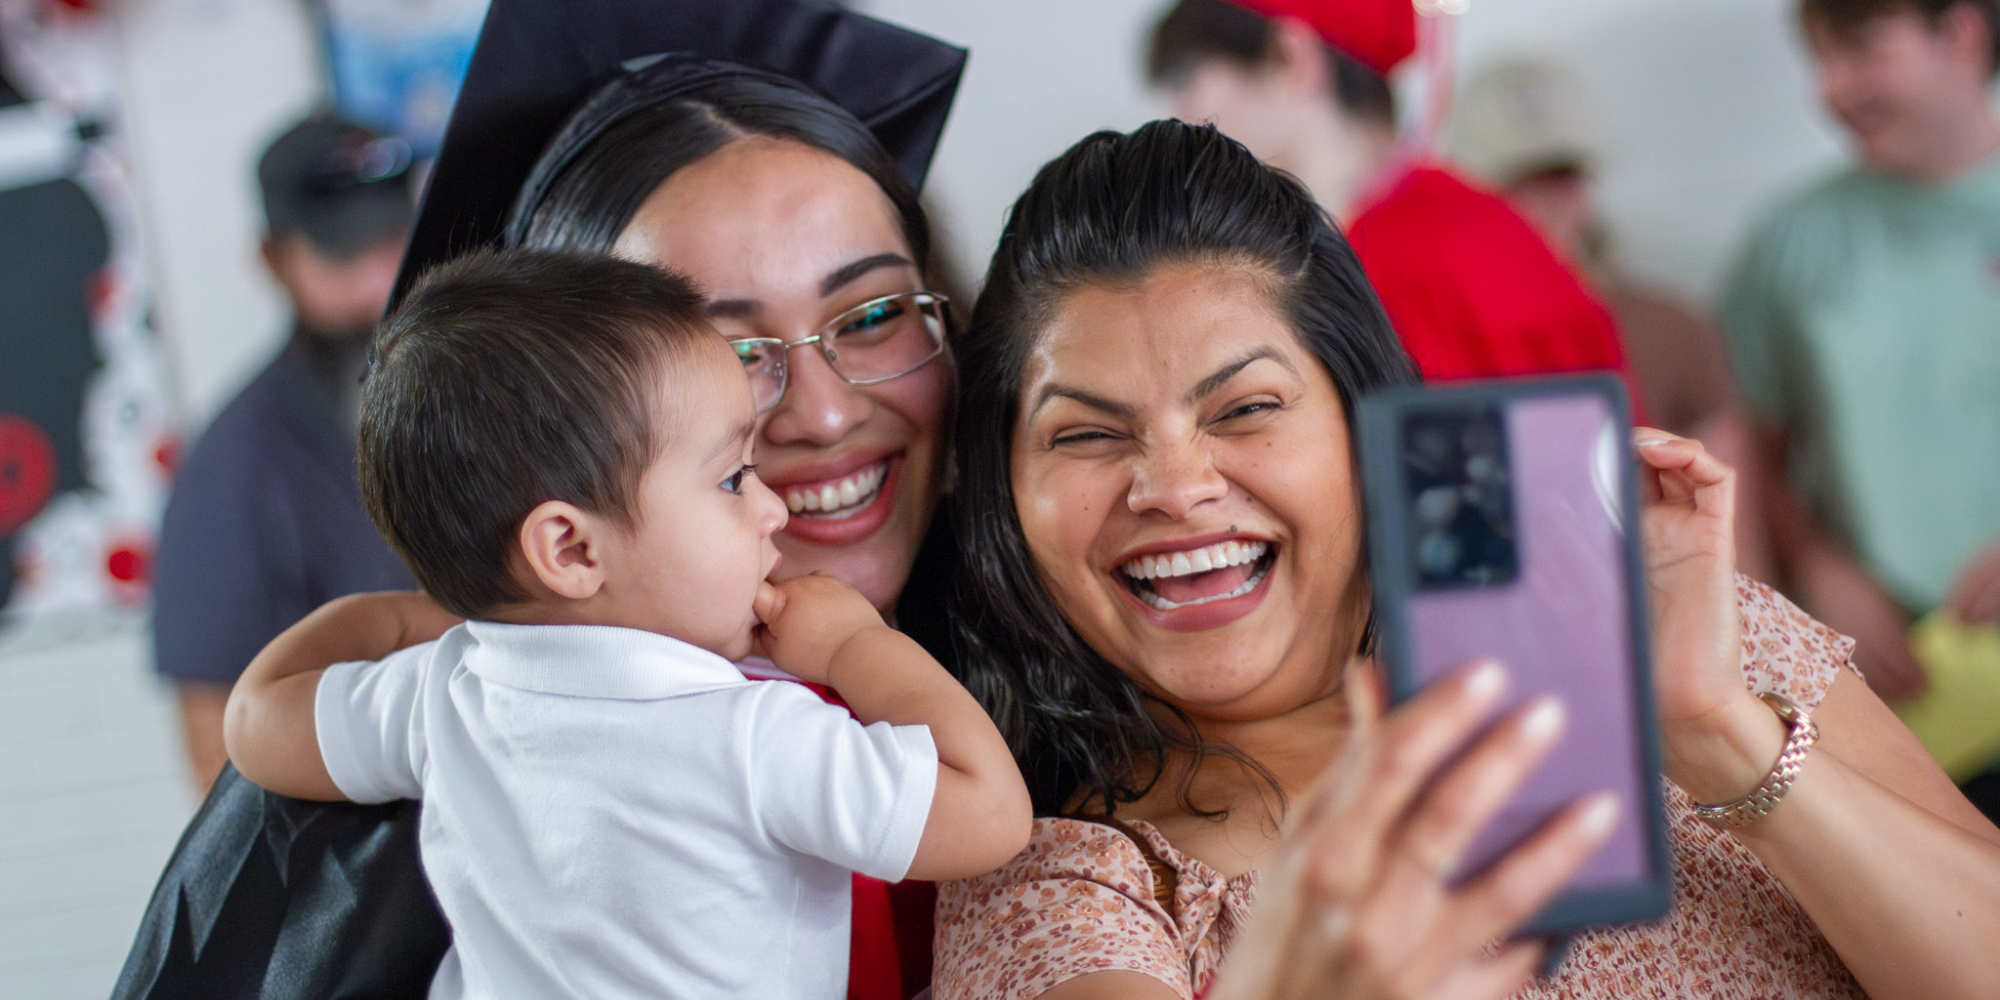 A parent takes a selfie with her graduating senior child in cap and gown while she holds a toddler